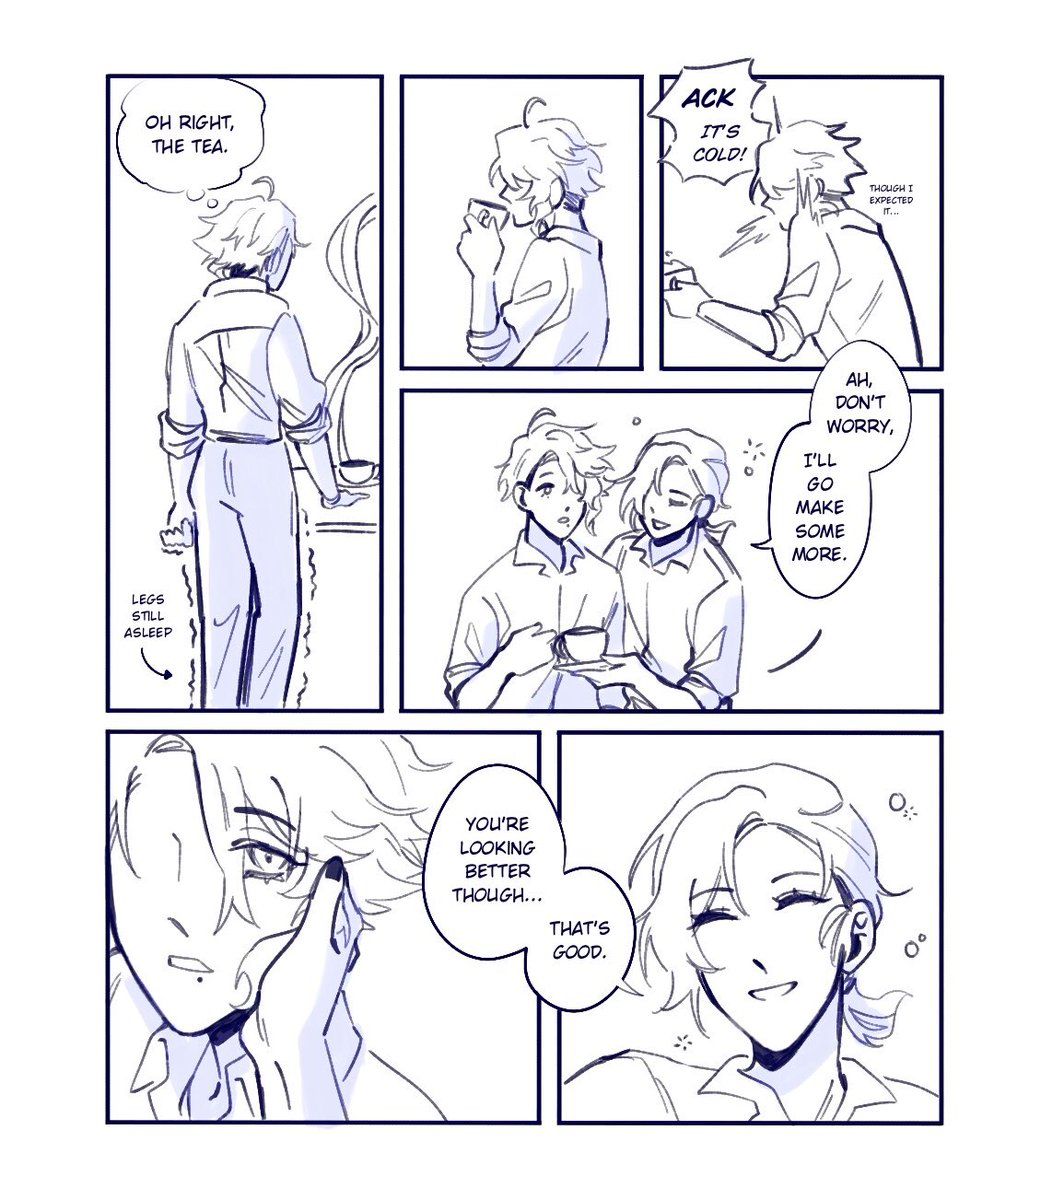 [twst oc] omake 2: azul didnt want to waste the tea and lorel is sometimes oddly affectionate when they've just woken up LOL 